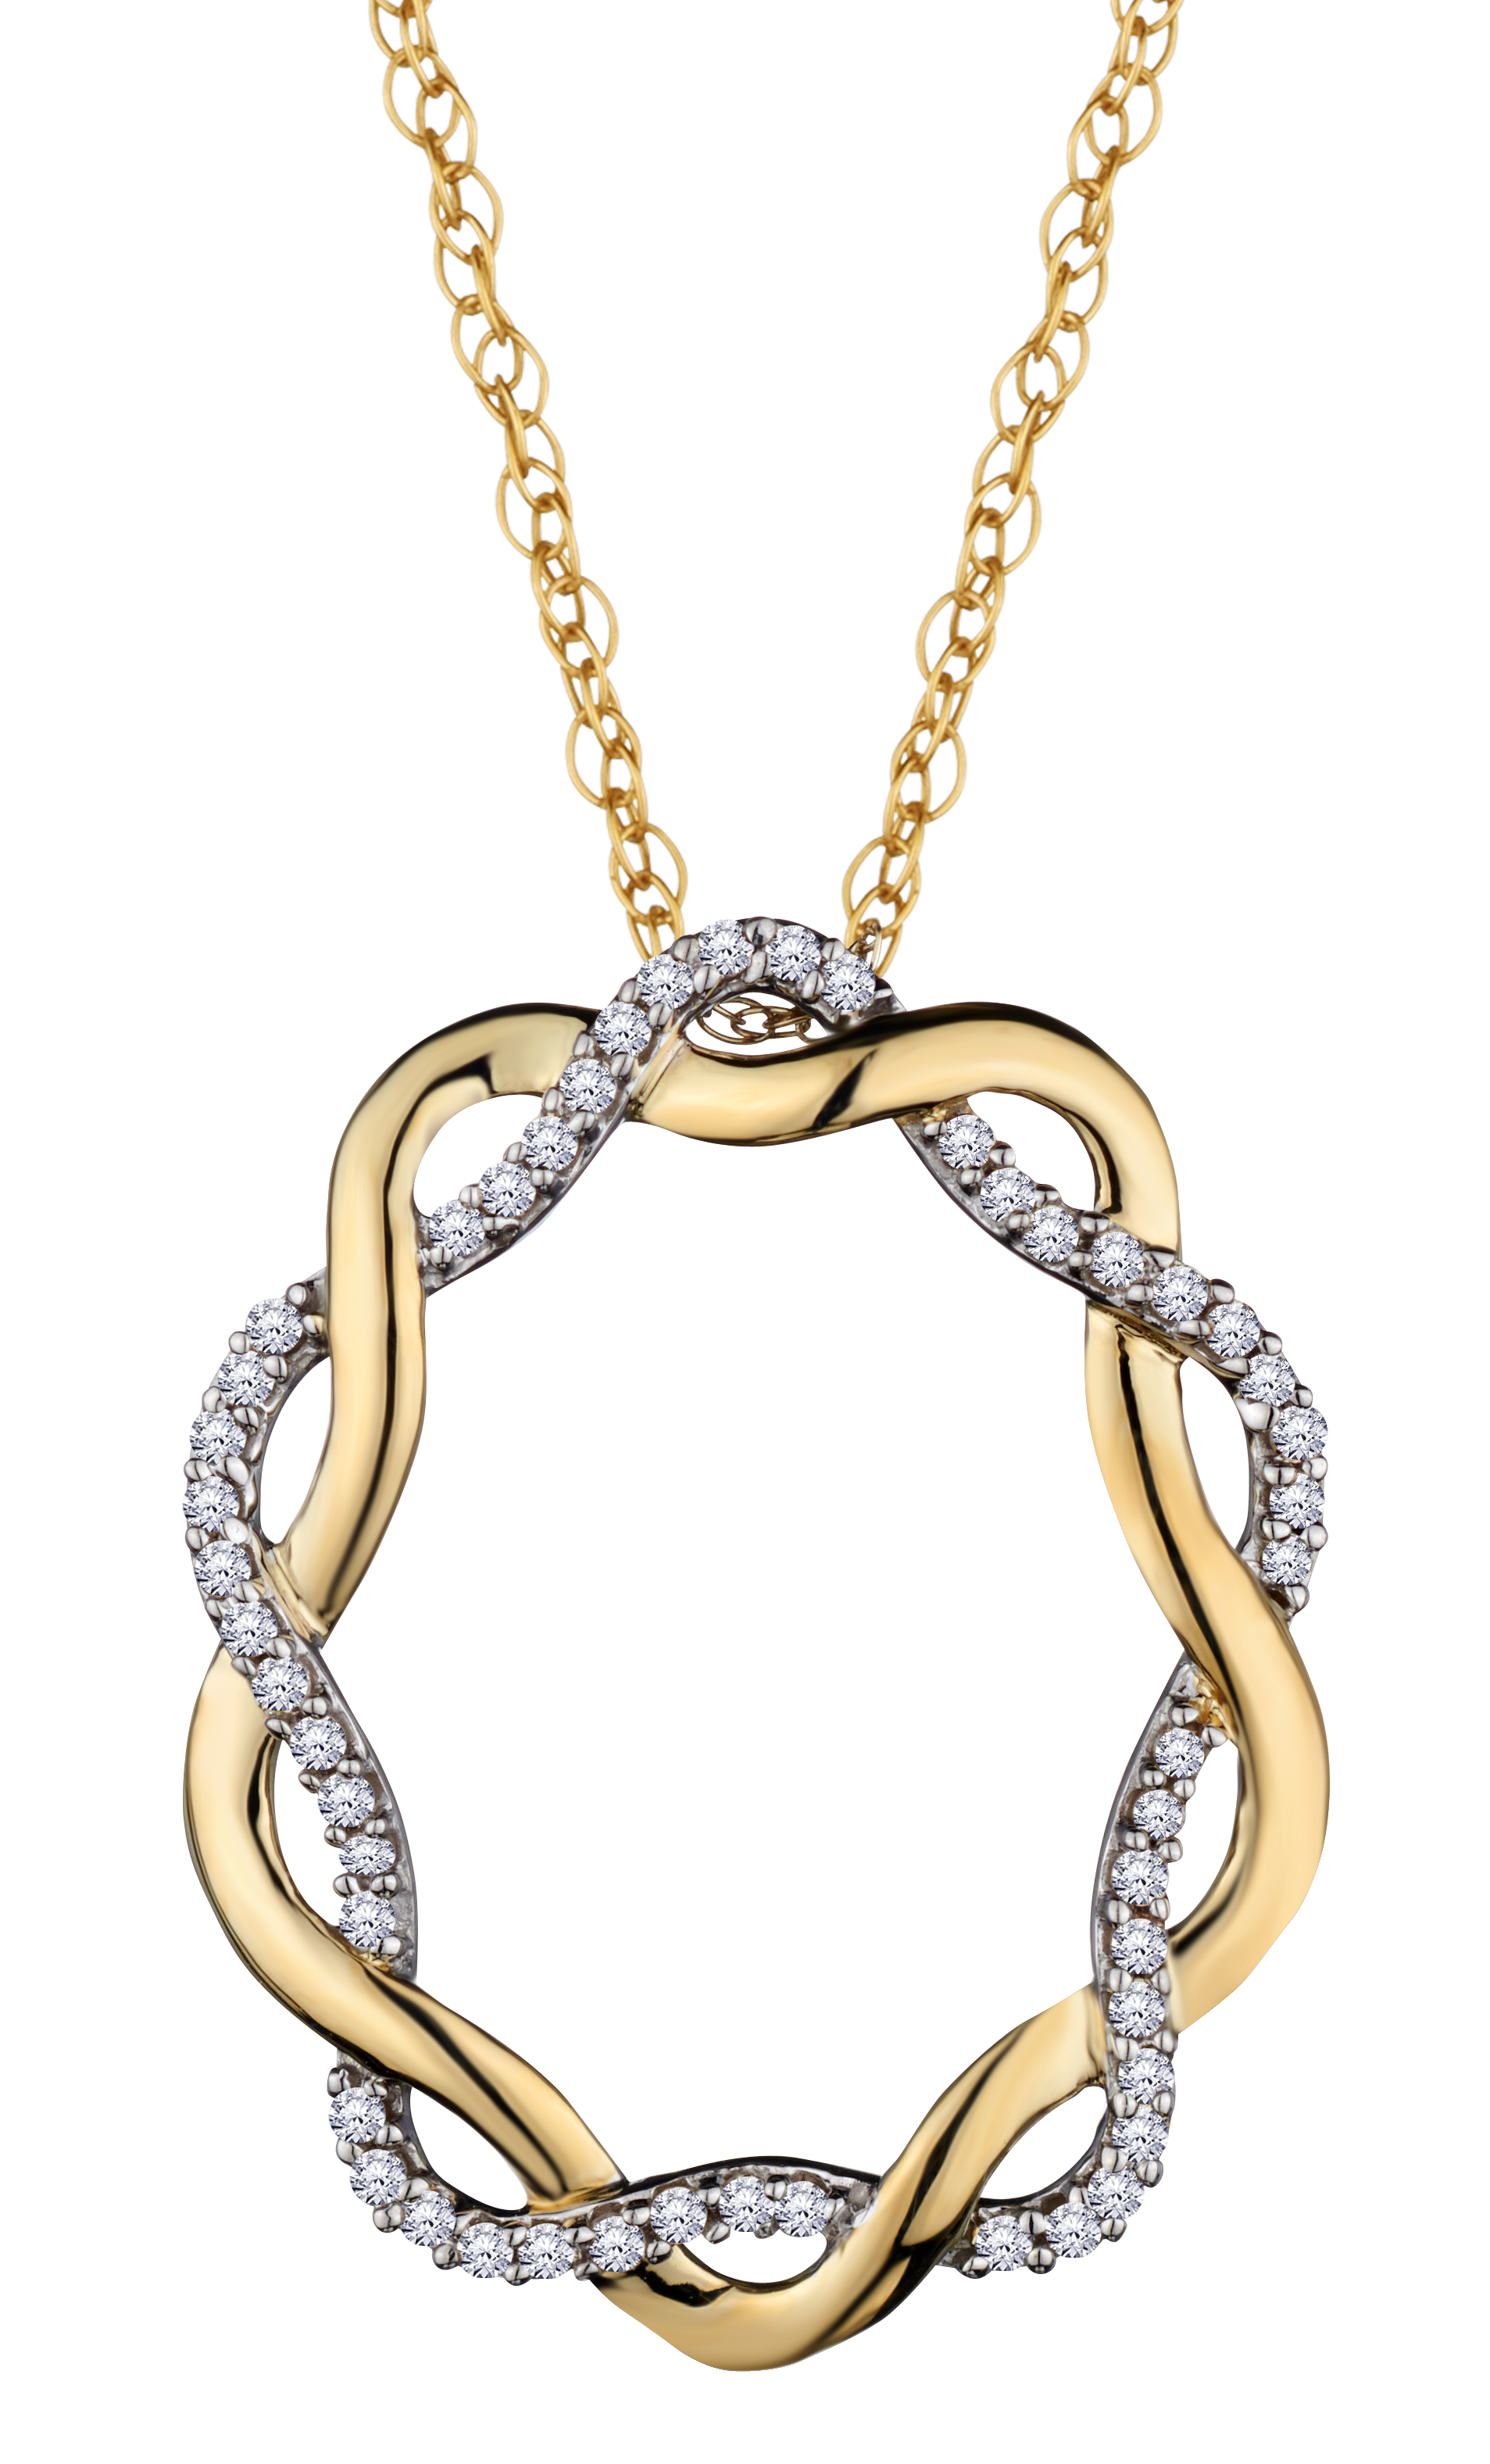 .14 Carat of Diamonds "Entwined" Pendant, 10kt Two Tone.....................NOW